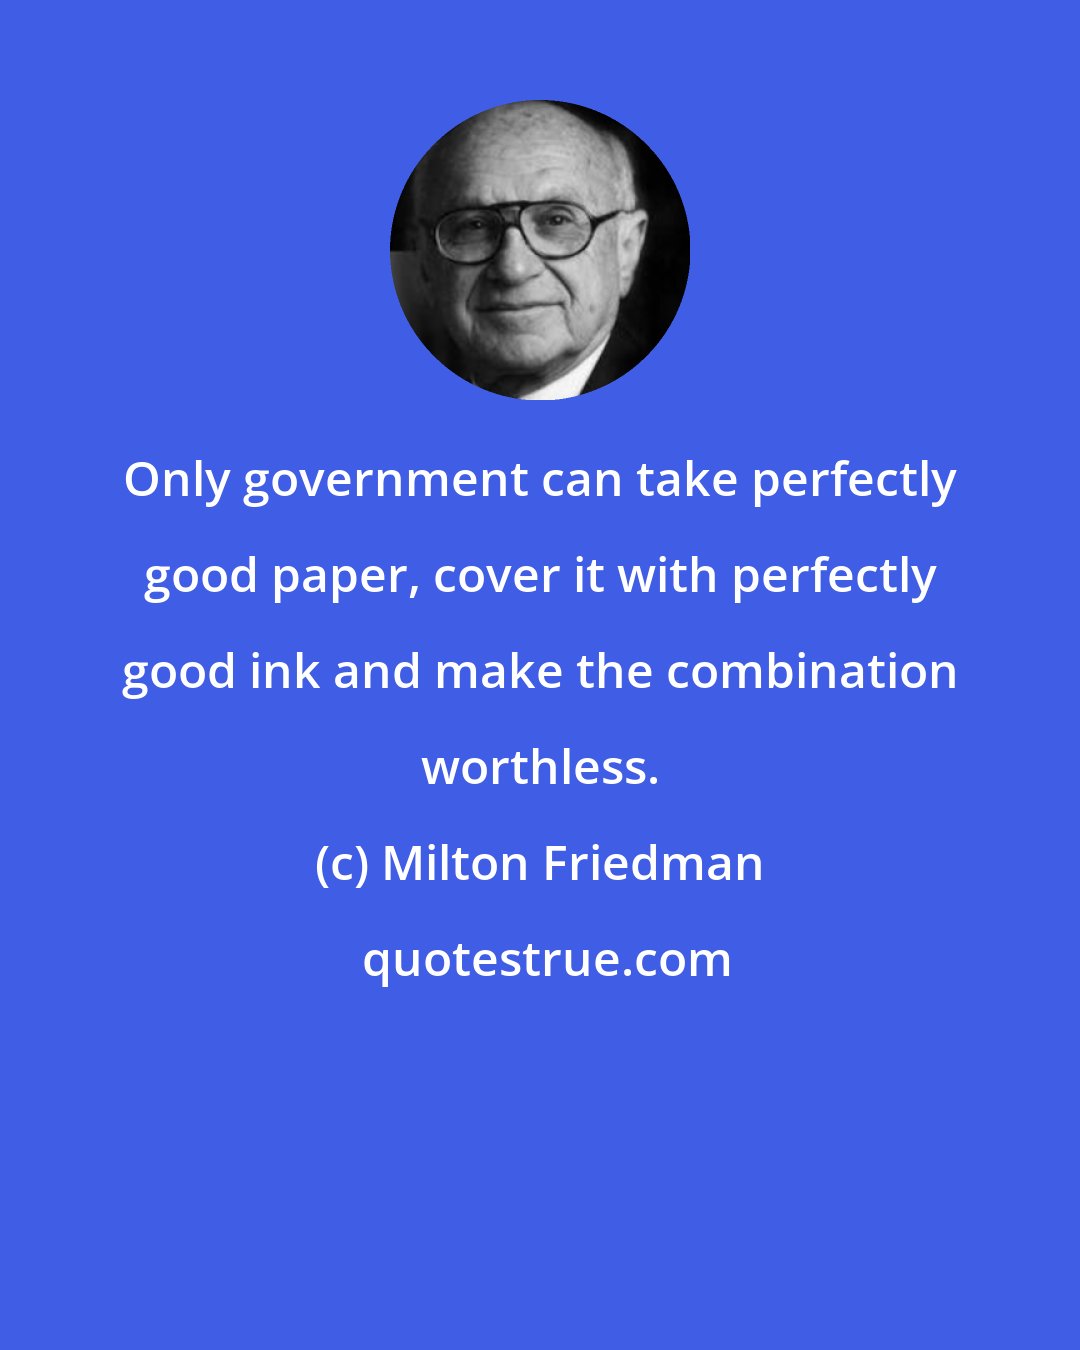 Milton Friedman: Only government can take perfectly good paper, cover it with perfectly good ink and make the combination worthless.